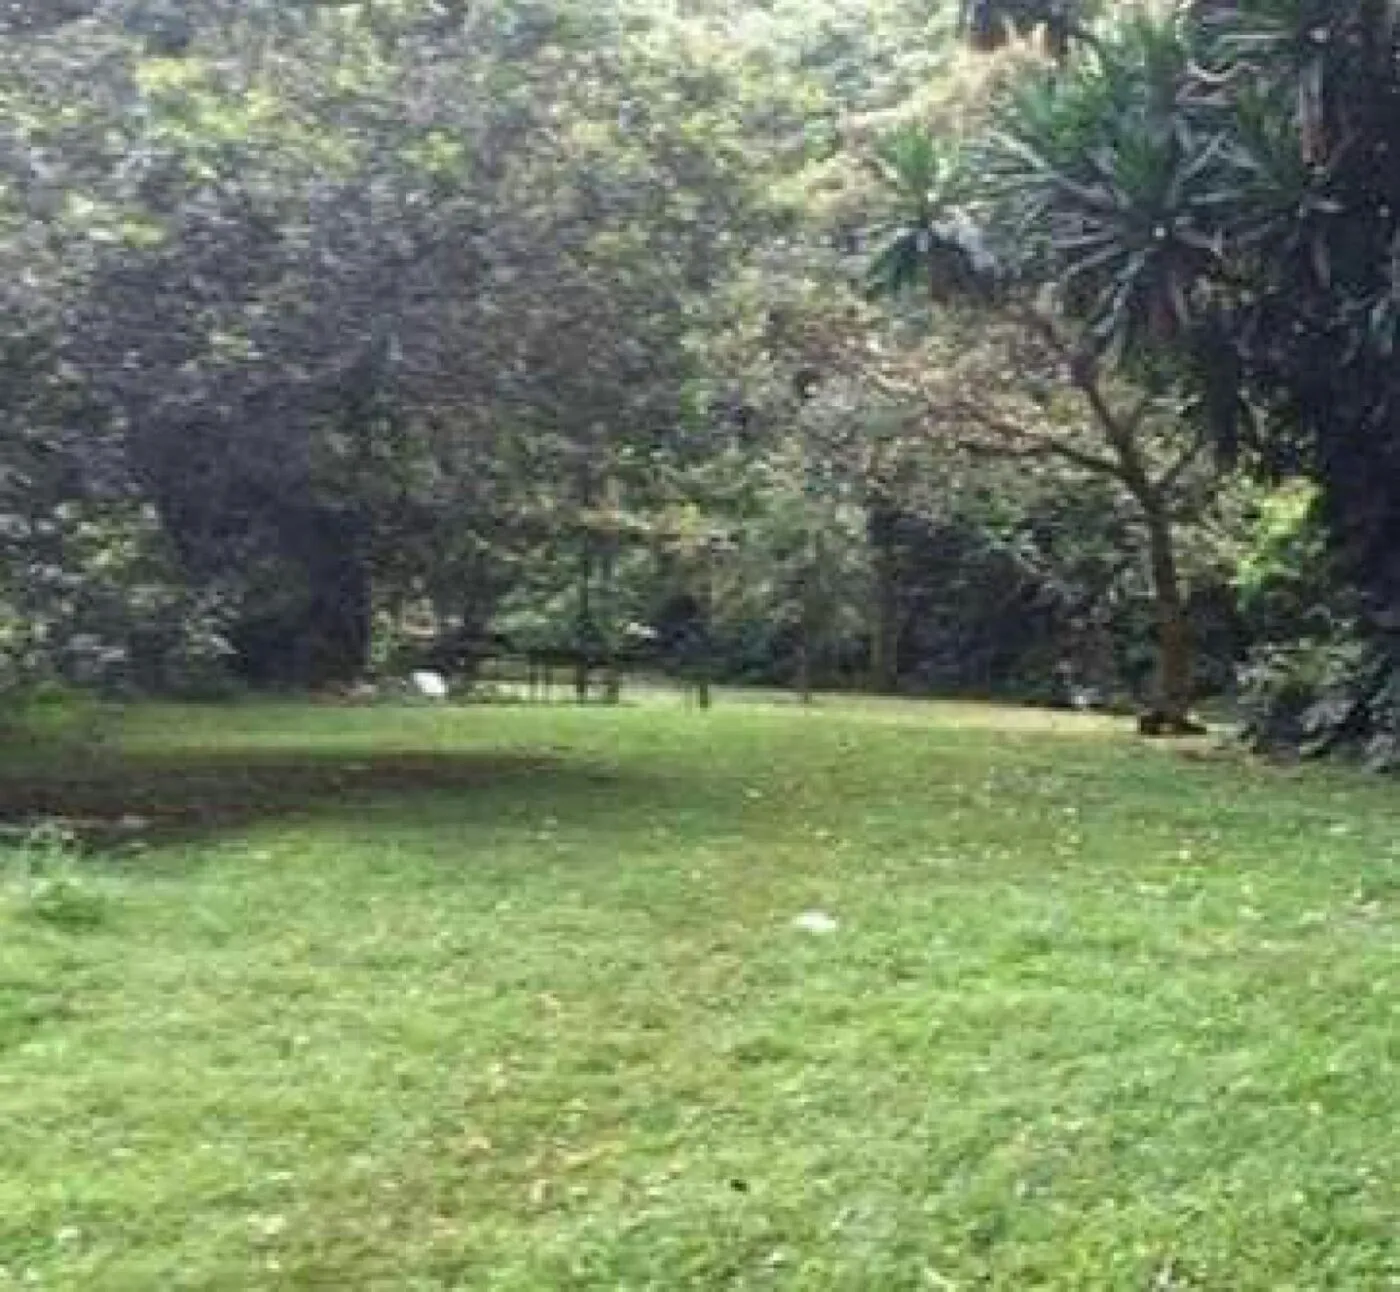 Land For Sale Real Estate-Land for sale in Karen Hardy 1/2 Acre @30M Ready Title Deed QUICK SALE Exclusive half acre 0.5🔥